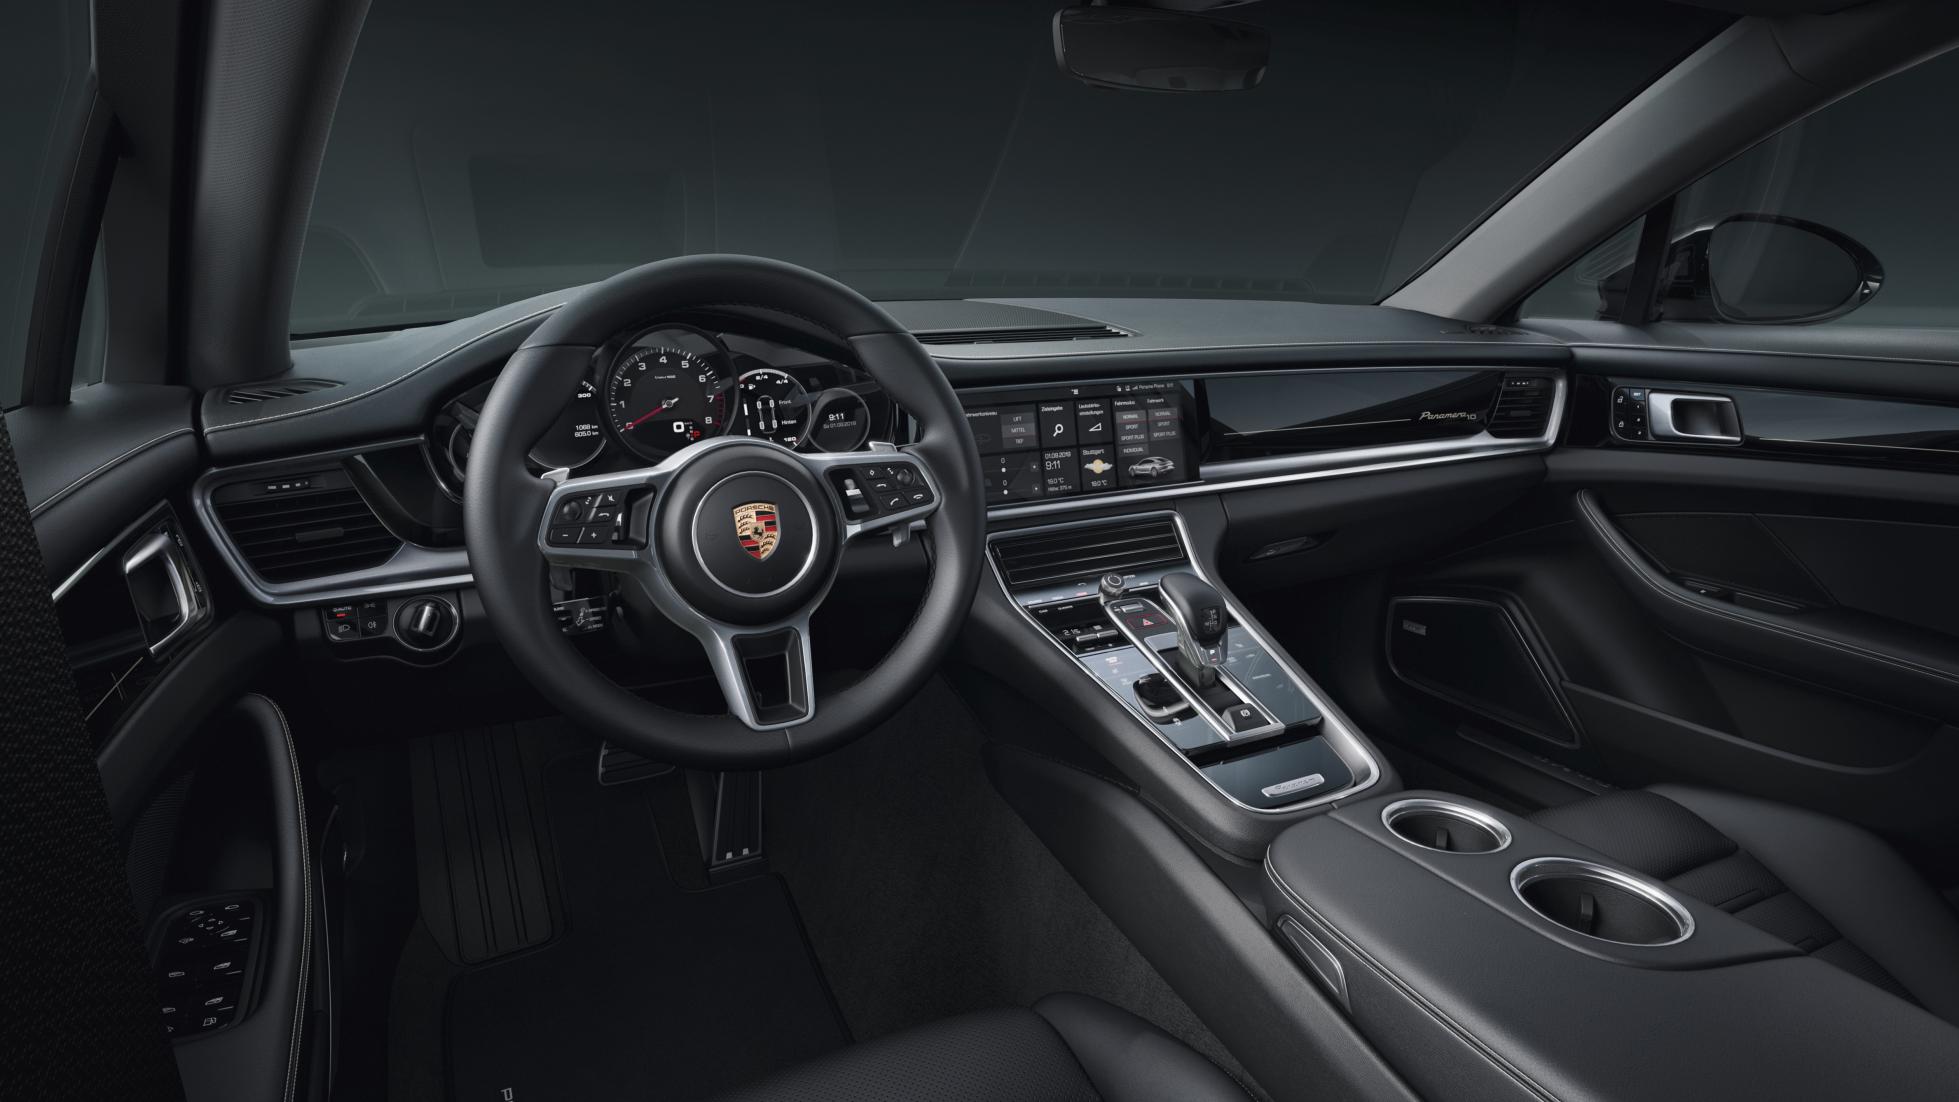 Is Porsche's 10 Years Edition the best looking Panamera yet?